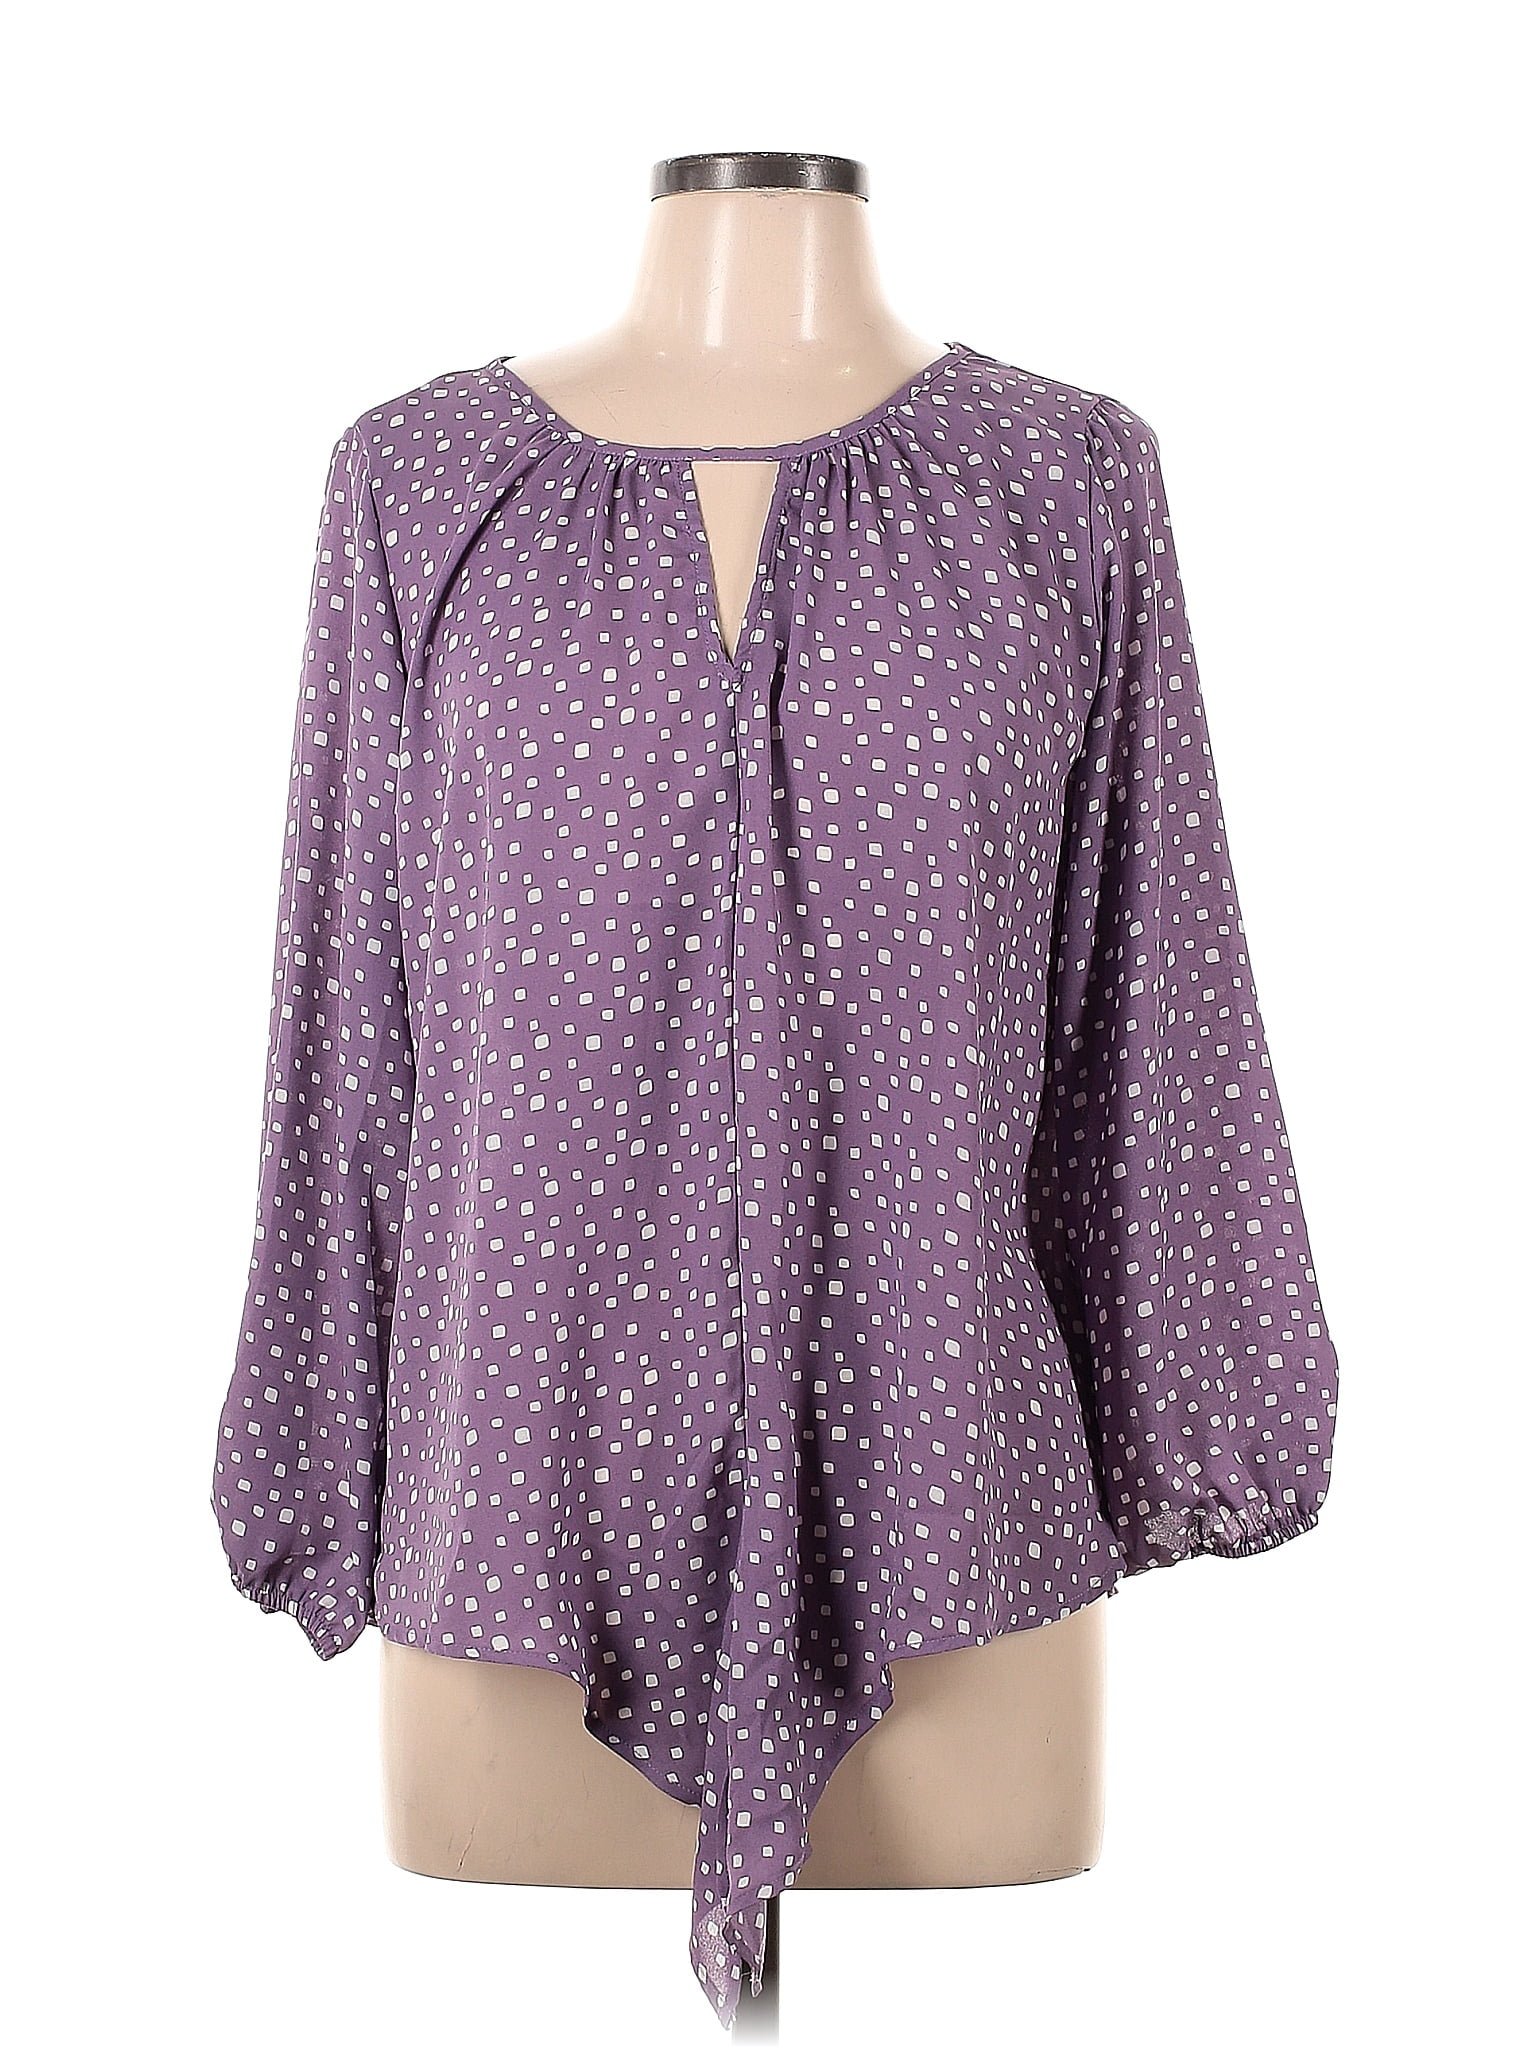 West Kei 100% Polyester Polka Dots Purple Long Sleeve Blouse Size L ...